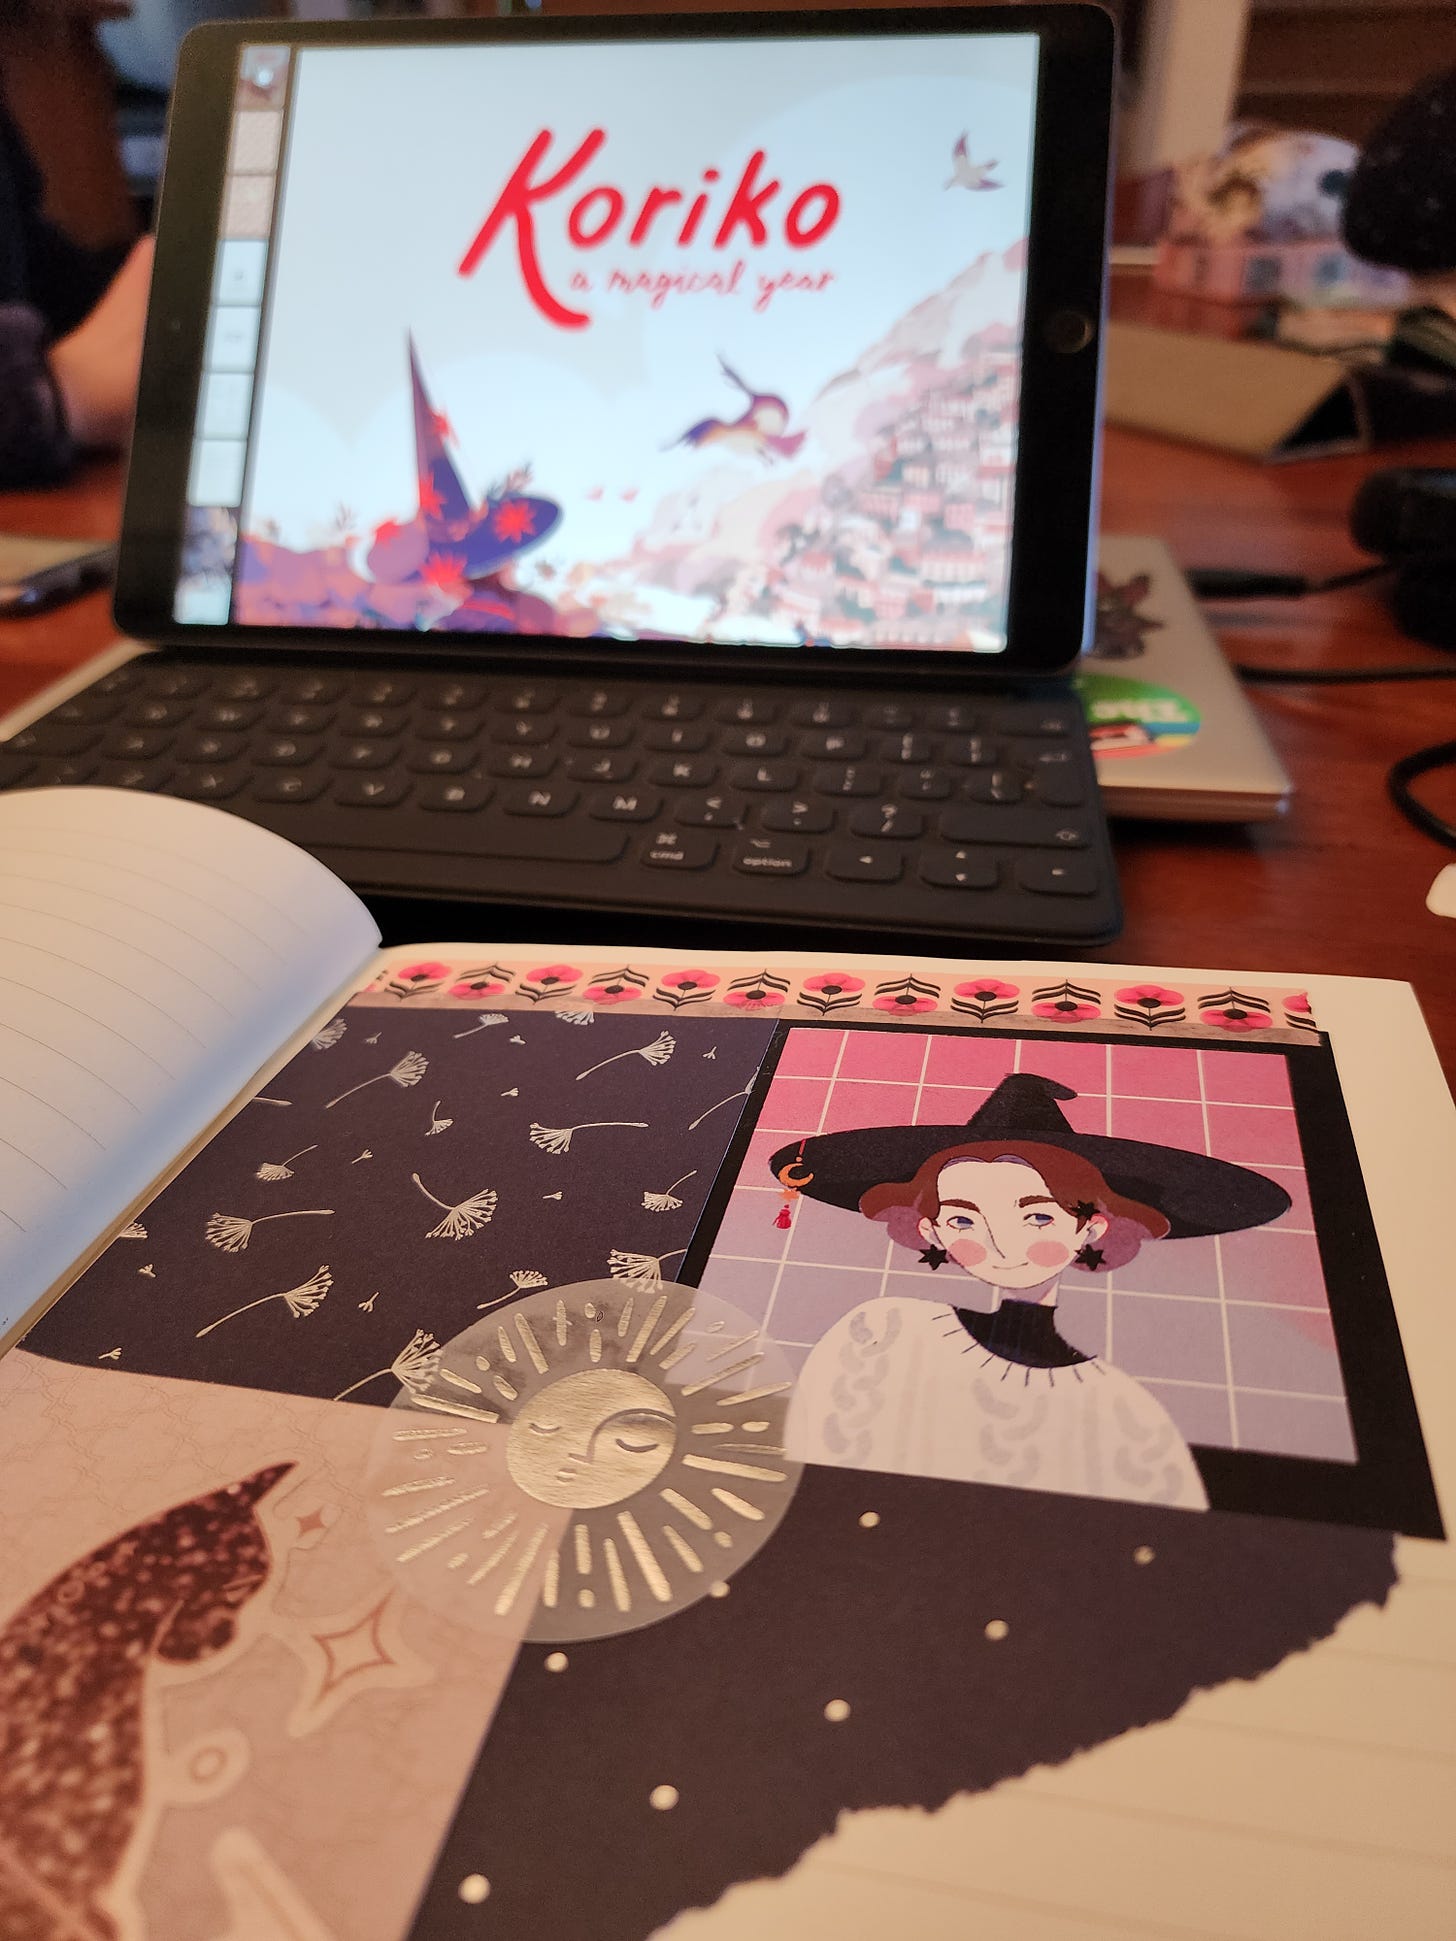 A scrapbook page that shows a drawing of a young witch and other interesting paper surrounding him. In the background, the digital version of Koriko sits open on an iPad.